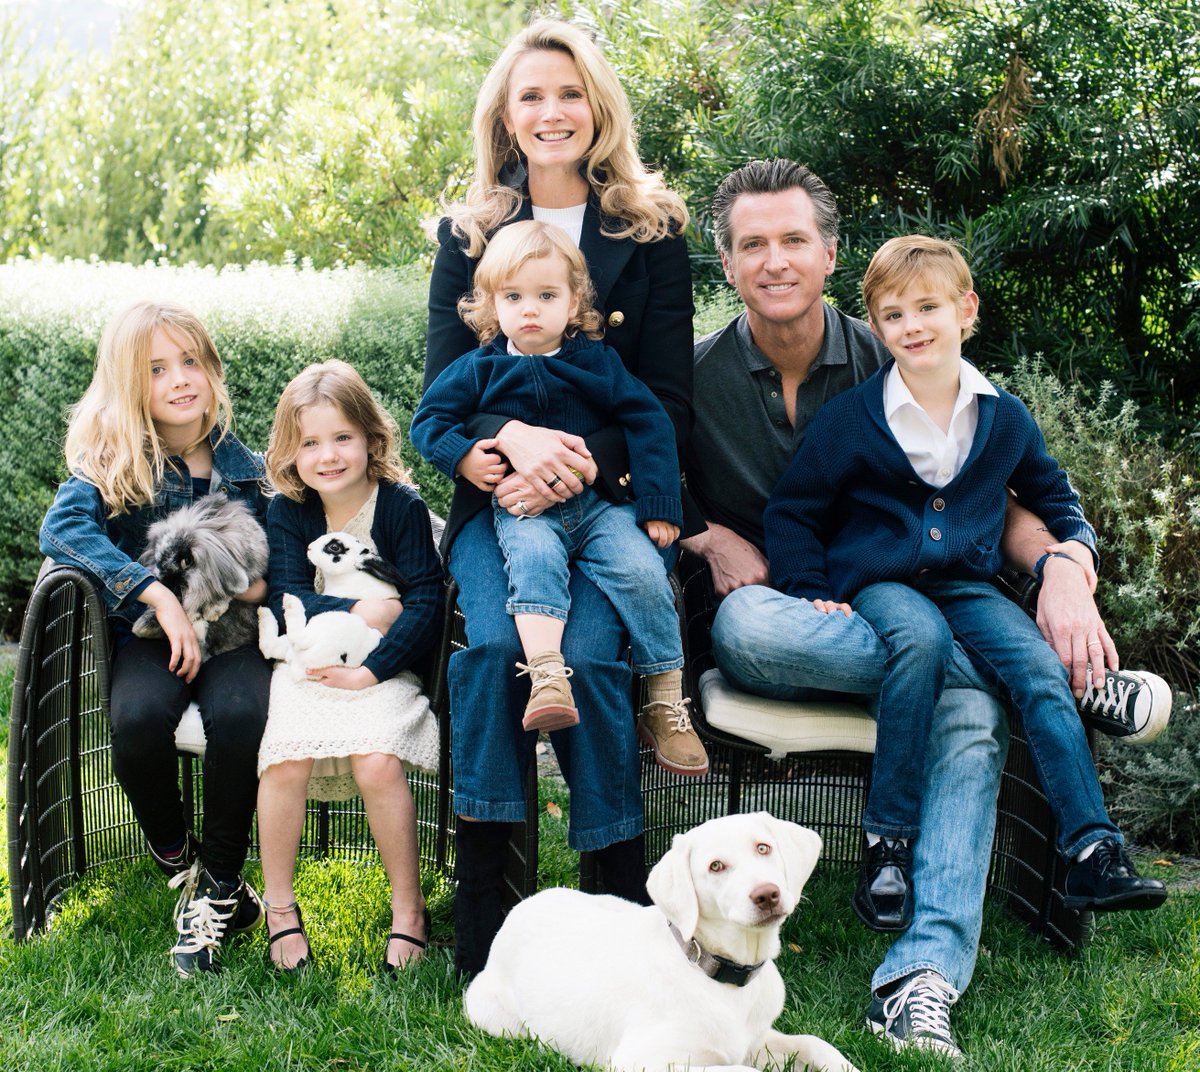 Gavin Newsom On Twitter Wishing You And Your Loved Ones Peace Joy And Most Of All Hope This Holiday Season Merry Christmas From Our Family To Yours P S Can You Tell